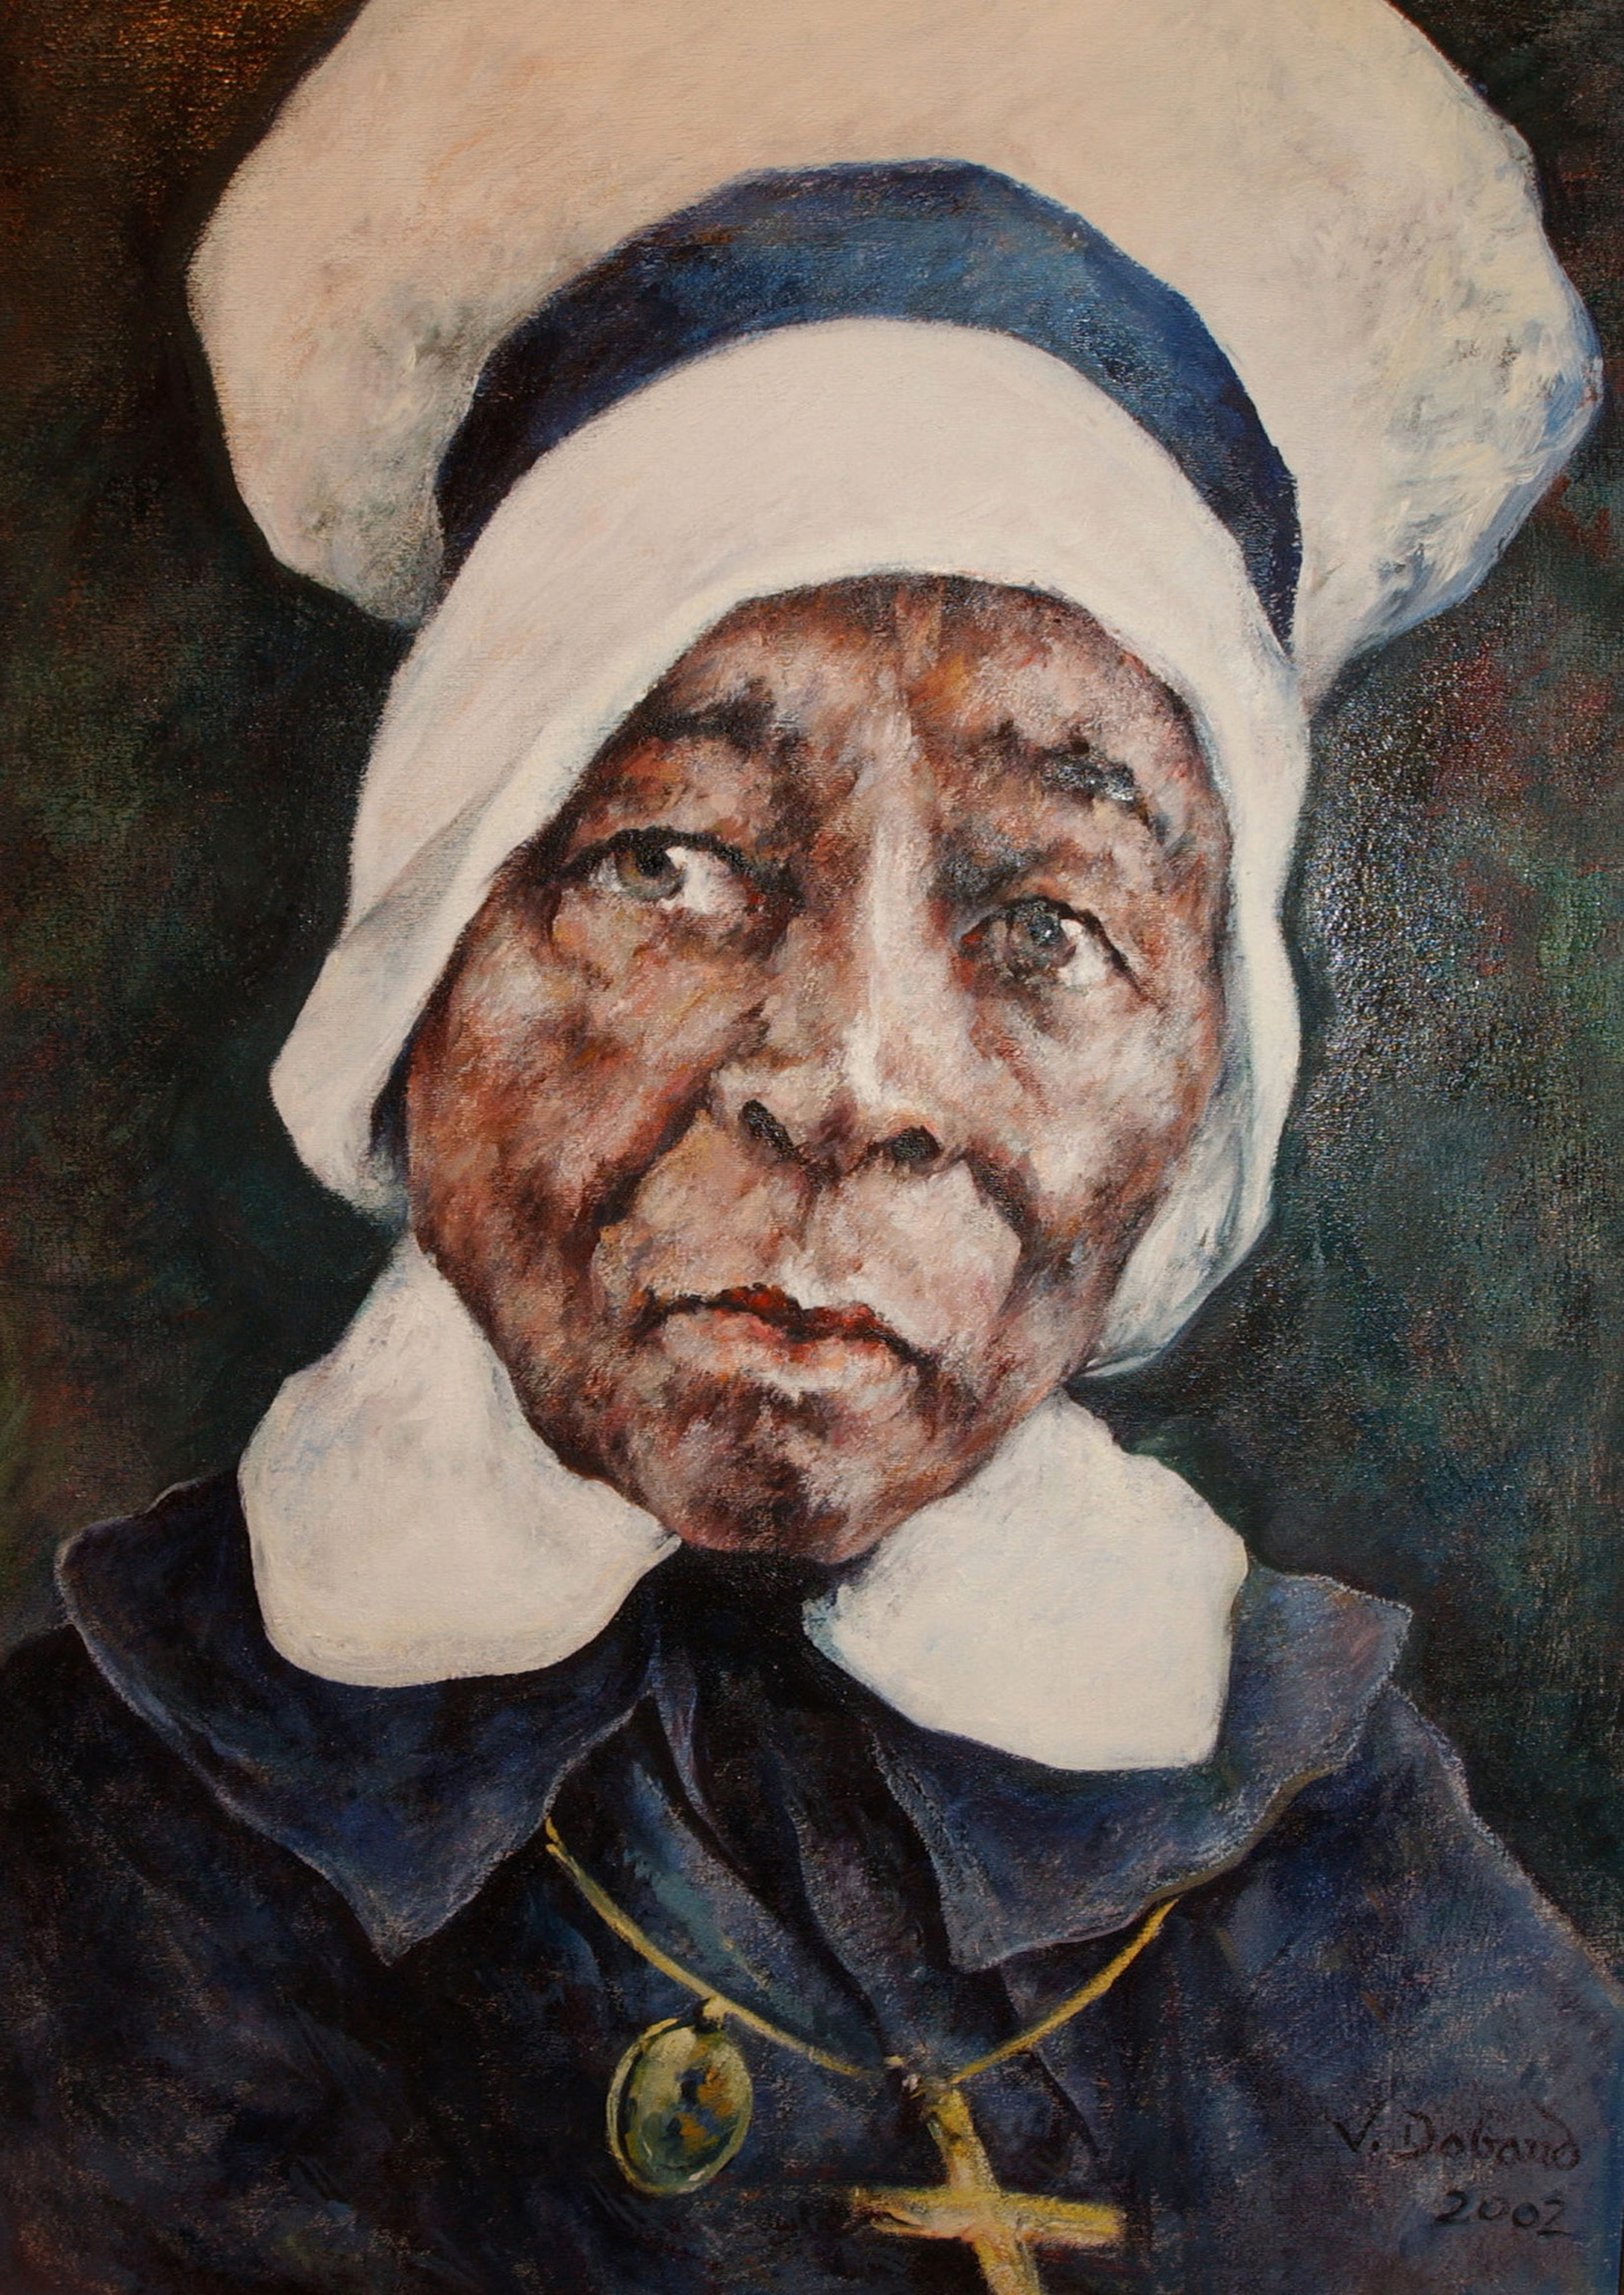 A painting depicts Mother Mary Elizabeth Lange, founder of the Oblate Sisters of Providence, the first Catholic order of African-American nuns, ... - mother-lange